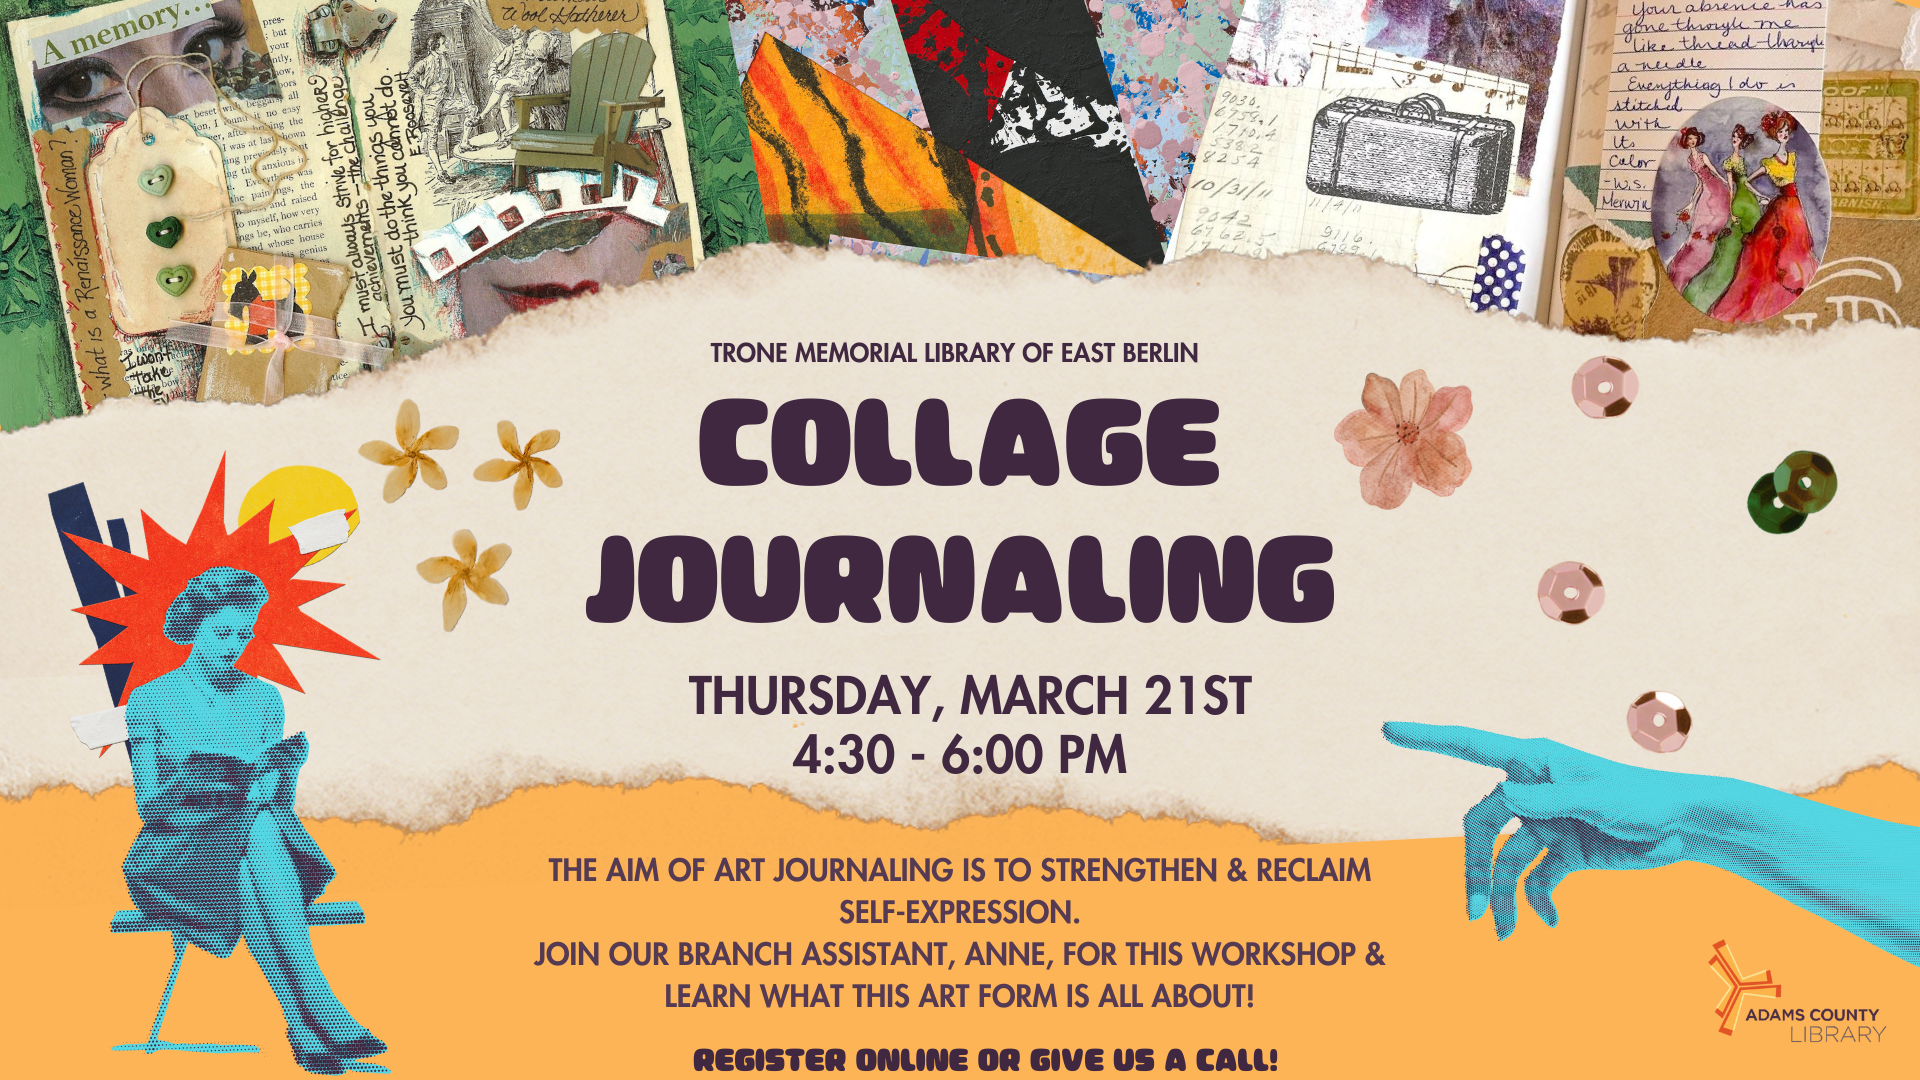 Flyer with information for Collage Journaling.